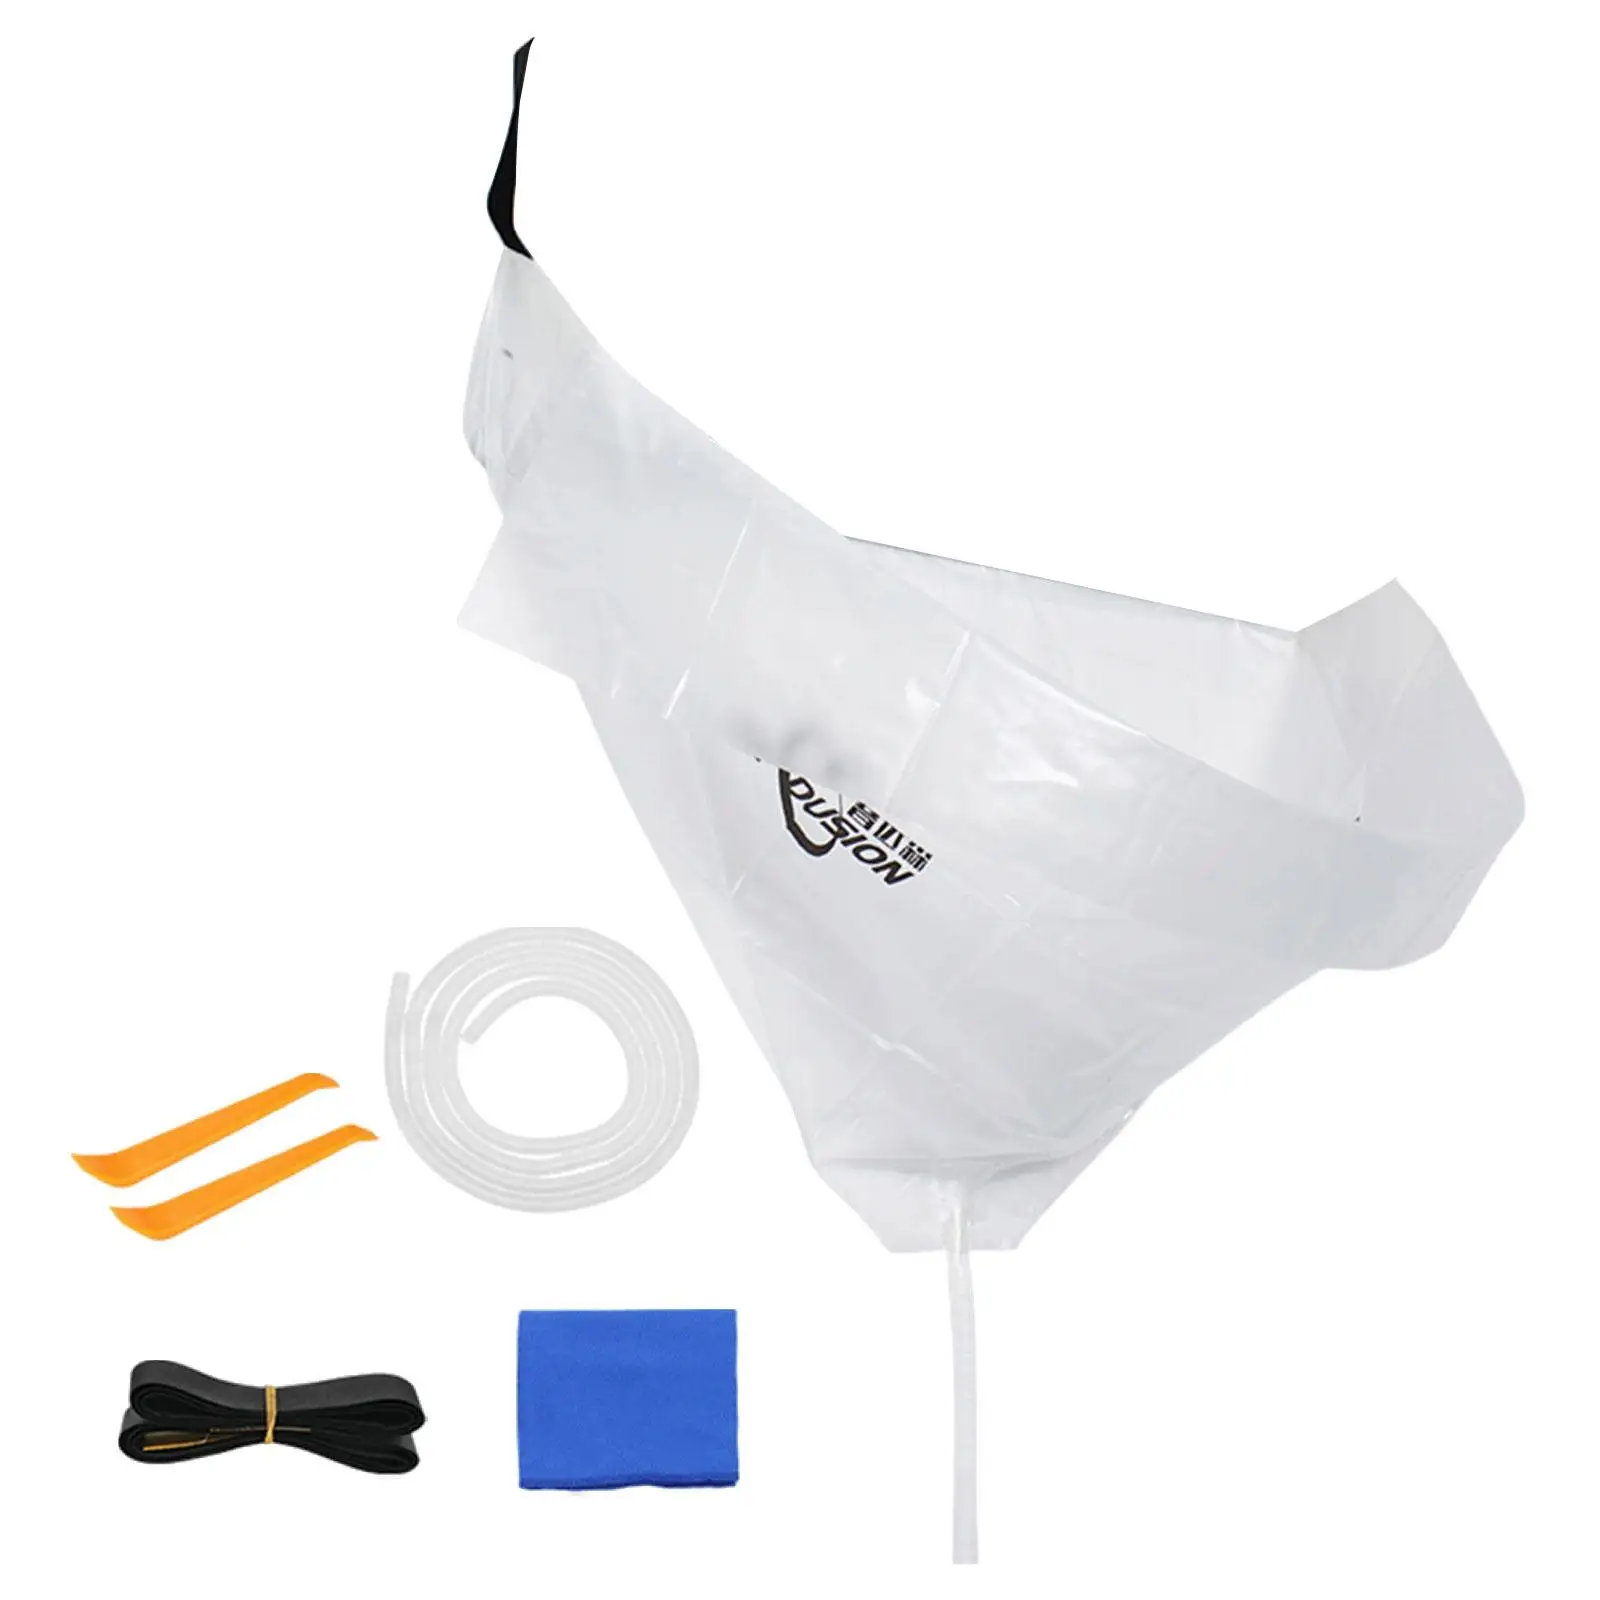 Air Conditioning Cleaning Cover Drain Outlet with Water Pipe Air Conditioning Service Bag for Home Shop Hotel Household